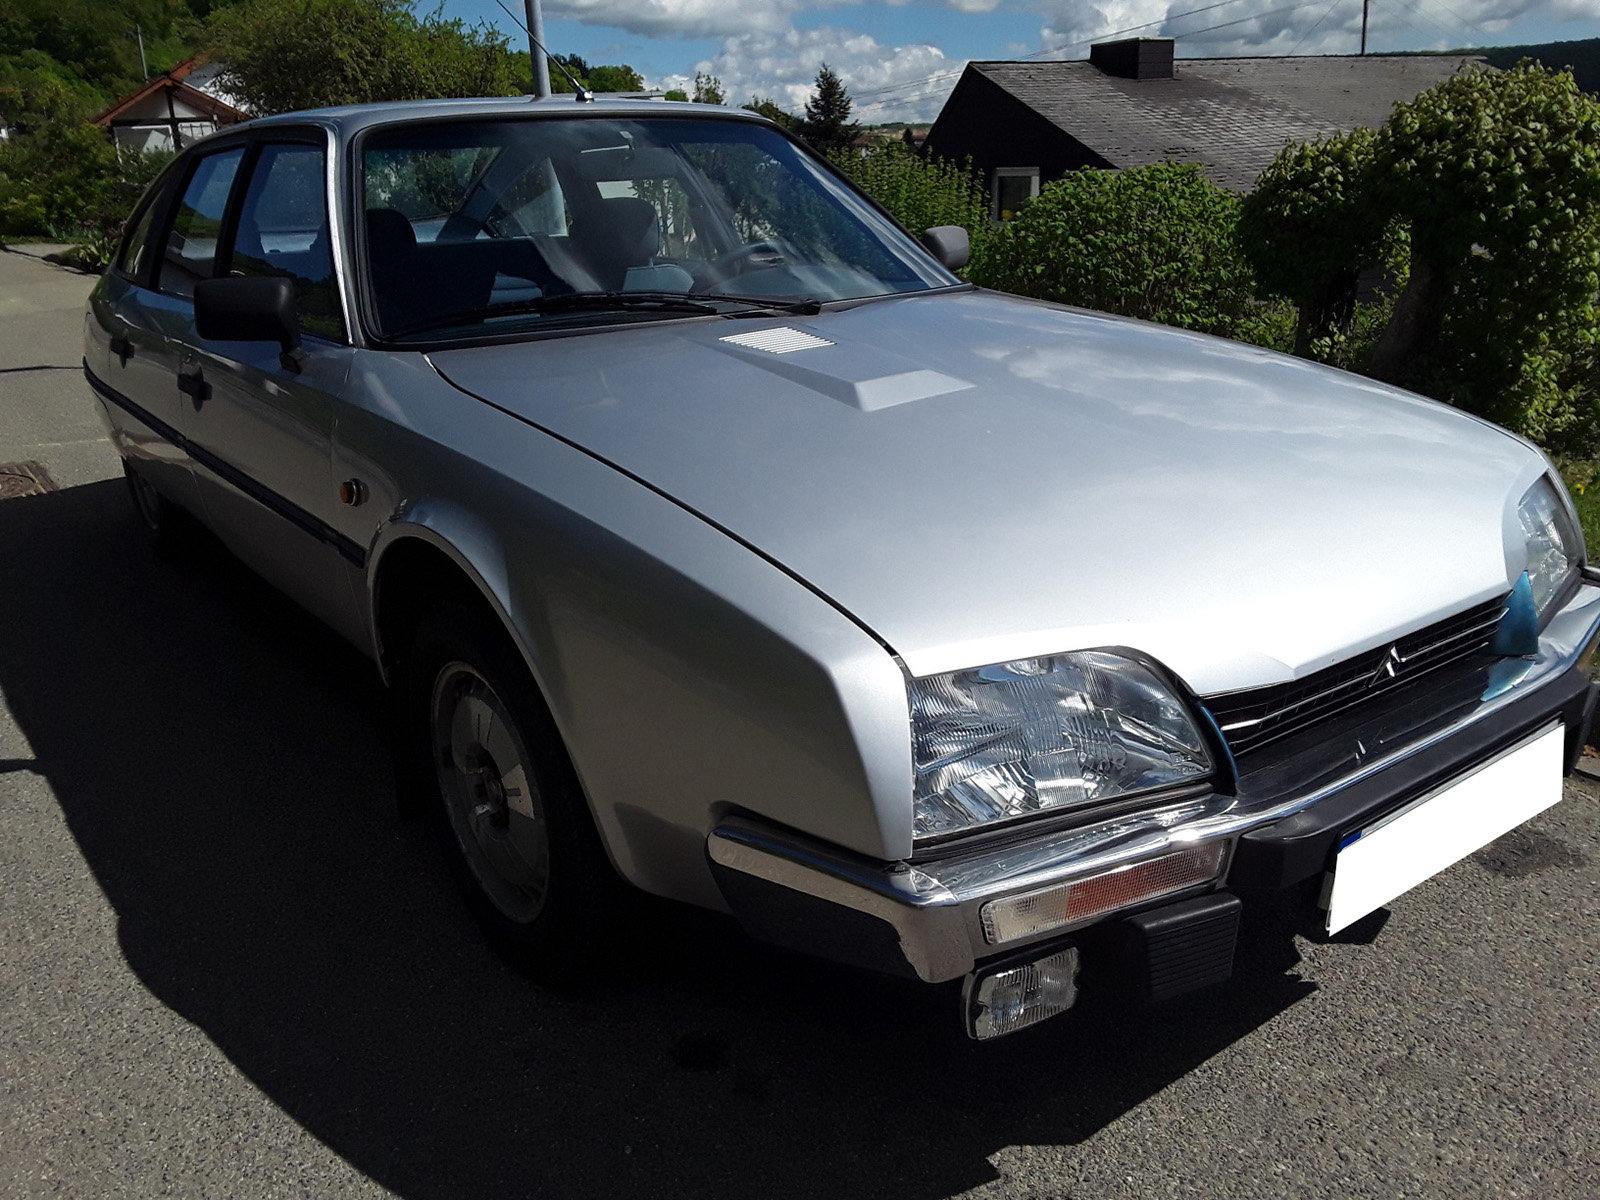 Citroen CX 2000 GT - 2 owners - only 52800 km